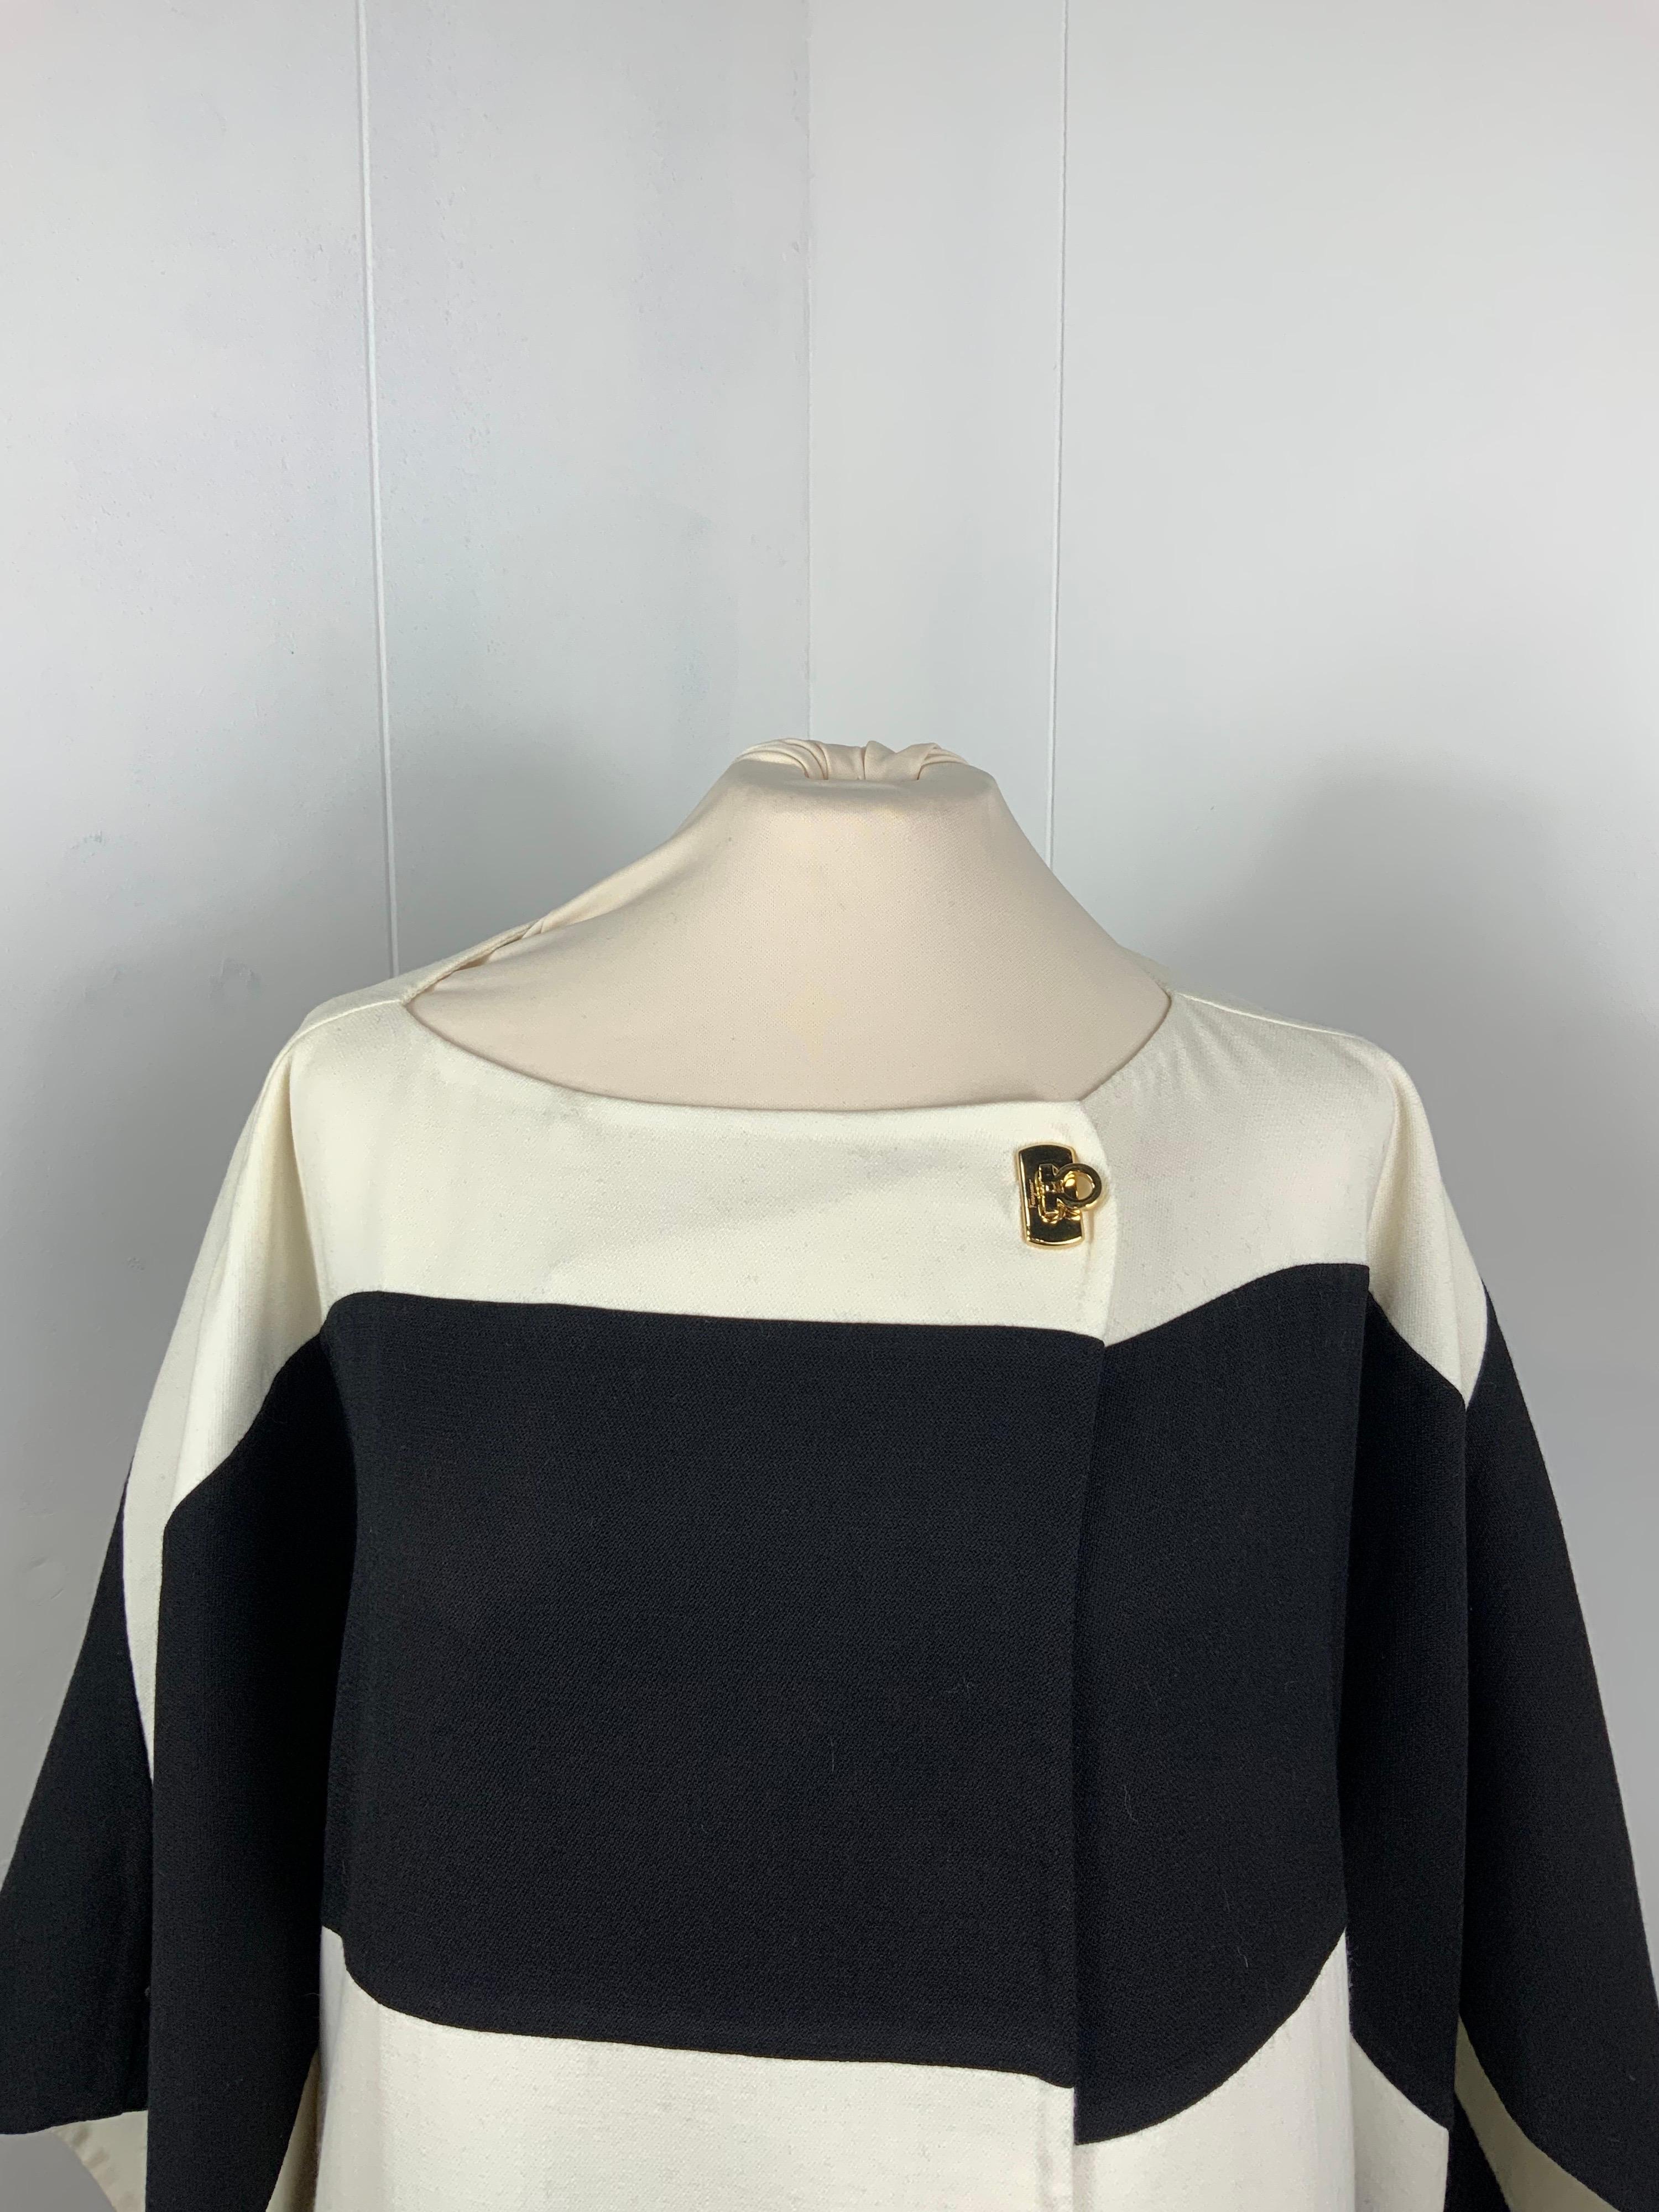 Salvatore Ferragamo Cloak.
100% virgin wool.
Featuring gold hardware and 2 front pockets.
Size 38 Italian.
Shoulders 40 cm
Bust 44 cm
Length 92 cm
Sleeves 36 cm
Conditions: Good - Previously owned and gently worn, with little signs of use. May show